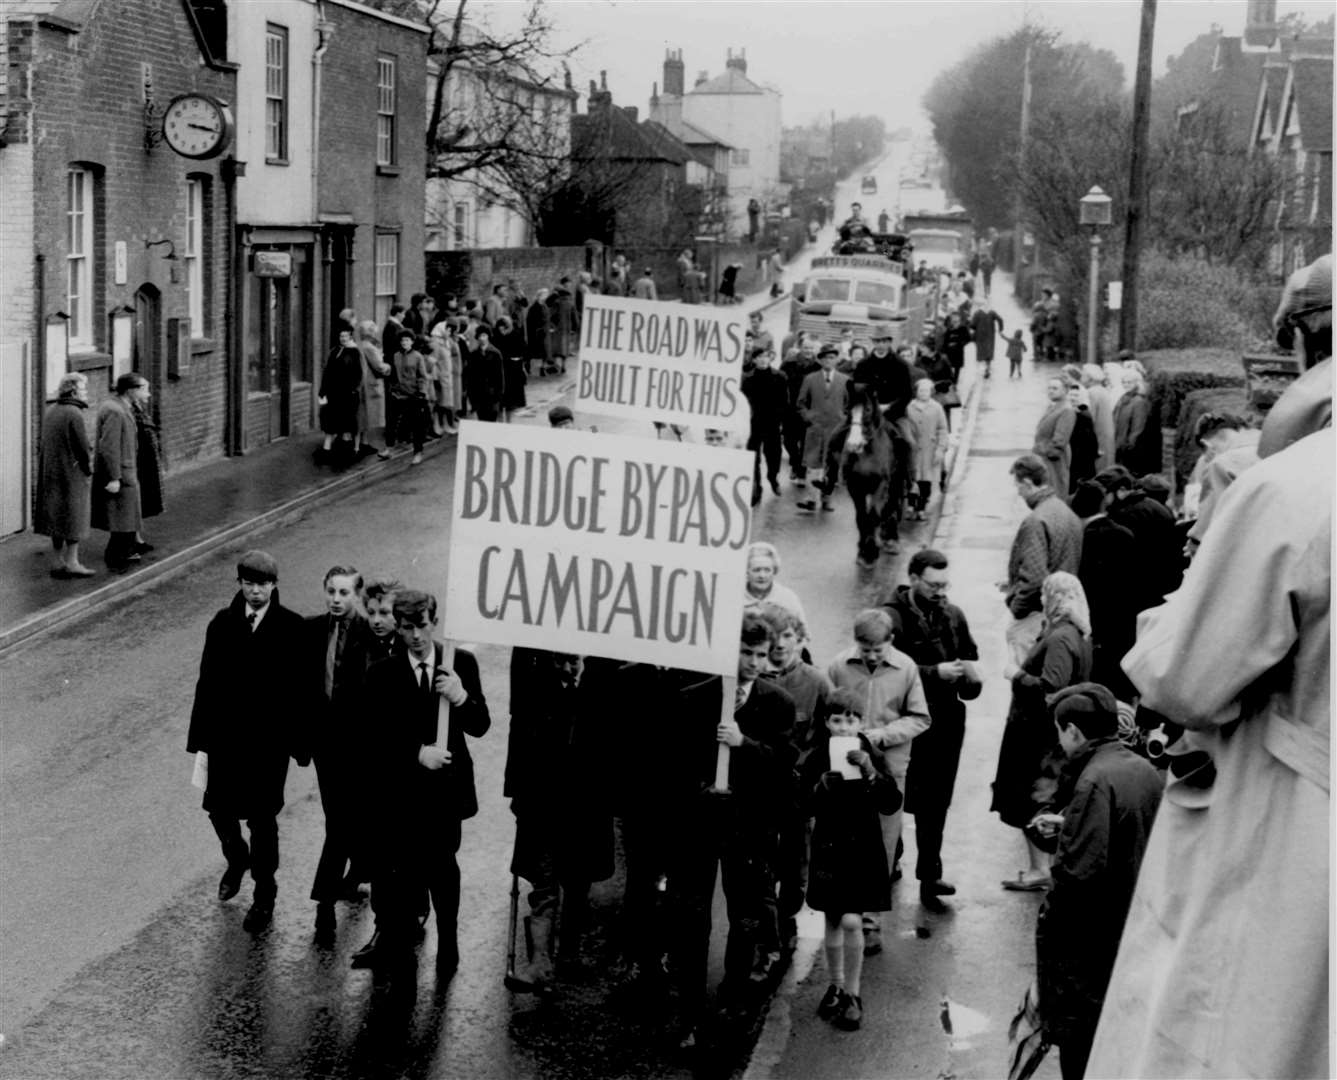 A coffin and a wrecked car were included in a protest procession through the streets of Bridge, near Canterbury, on Easter Sunday 1964 as part of the villagers' bypass campaign. Eight people had died and 50 had been injured in the village in the previous five years. Bridge Bypass opened in June 1976